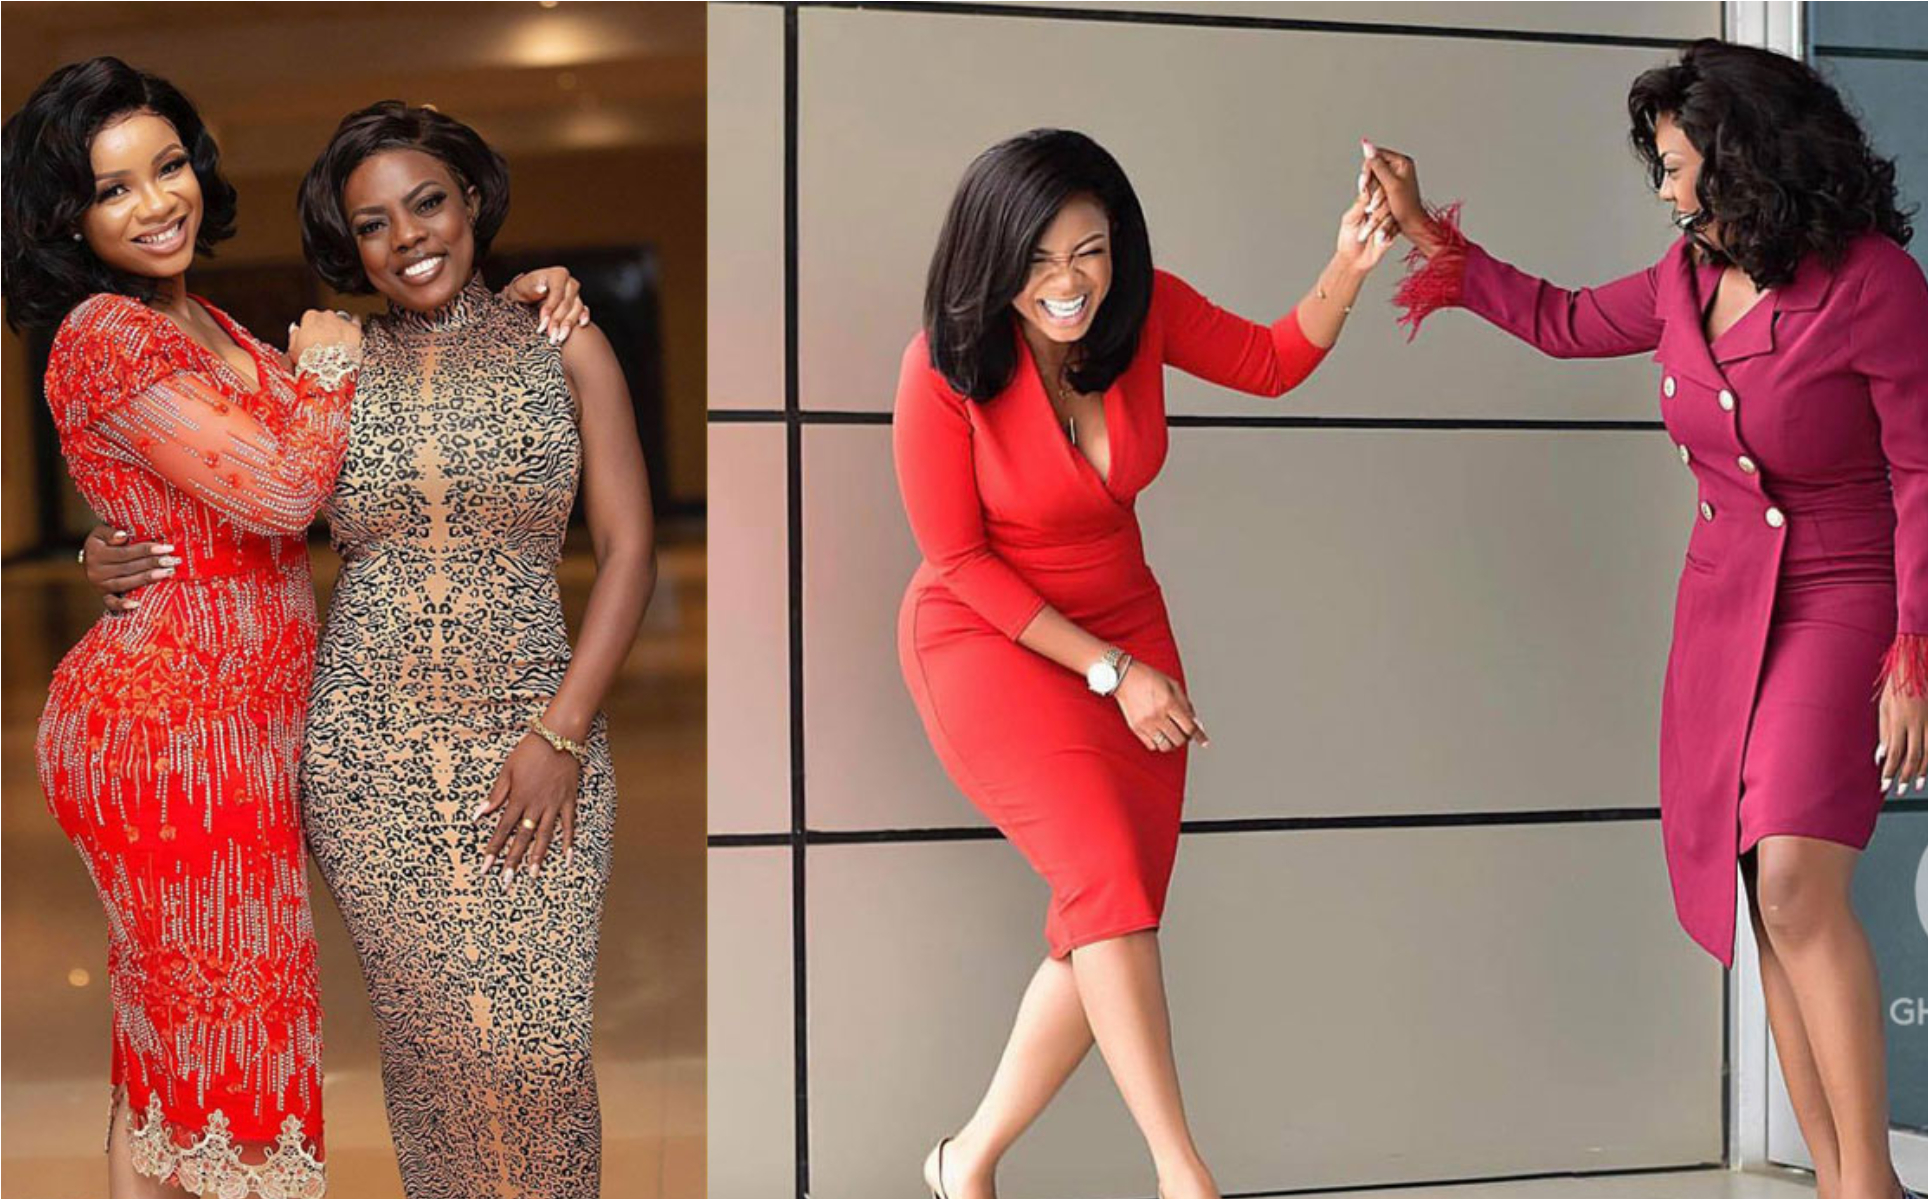 'We Don't Have Time For Your Nonsense' - Nana Aba Anamoah Finally Reacts To Serwaa Amihere's Leaked Videos